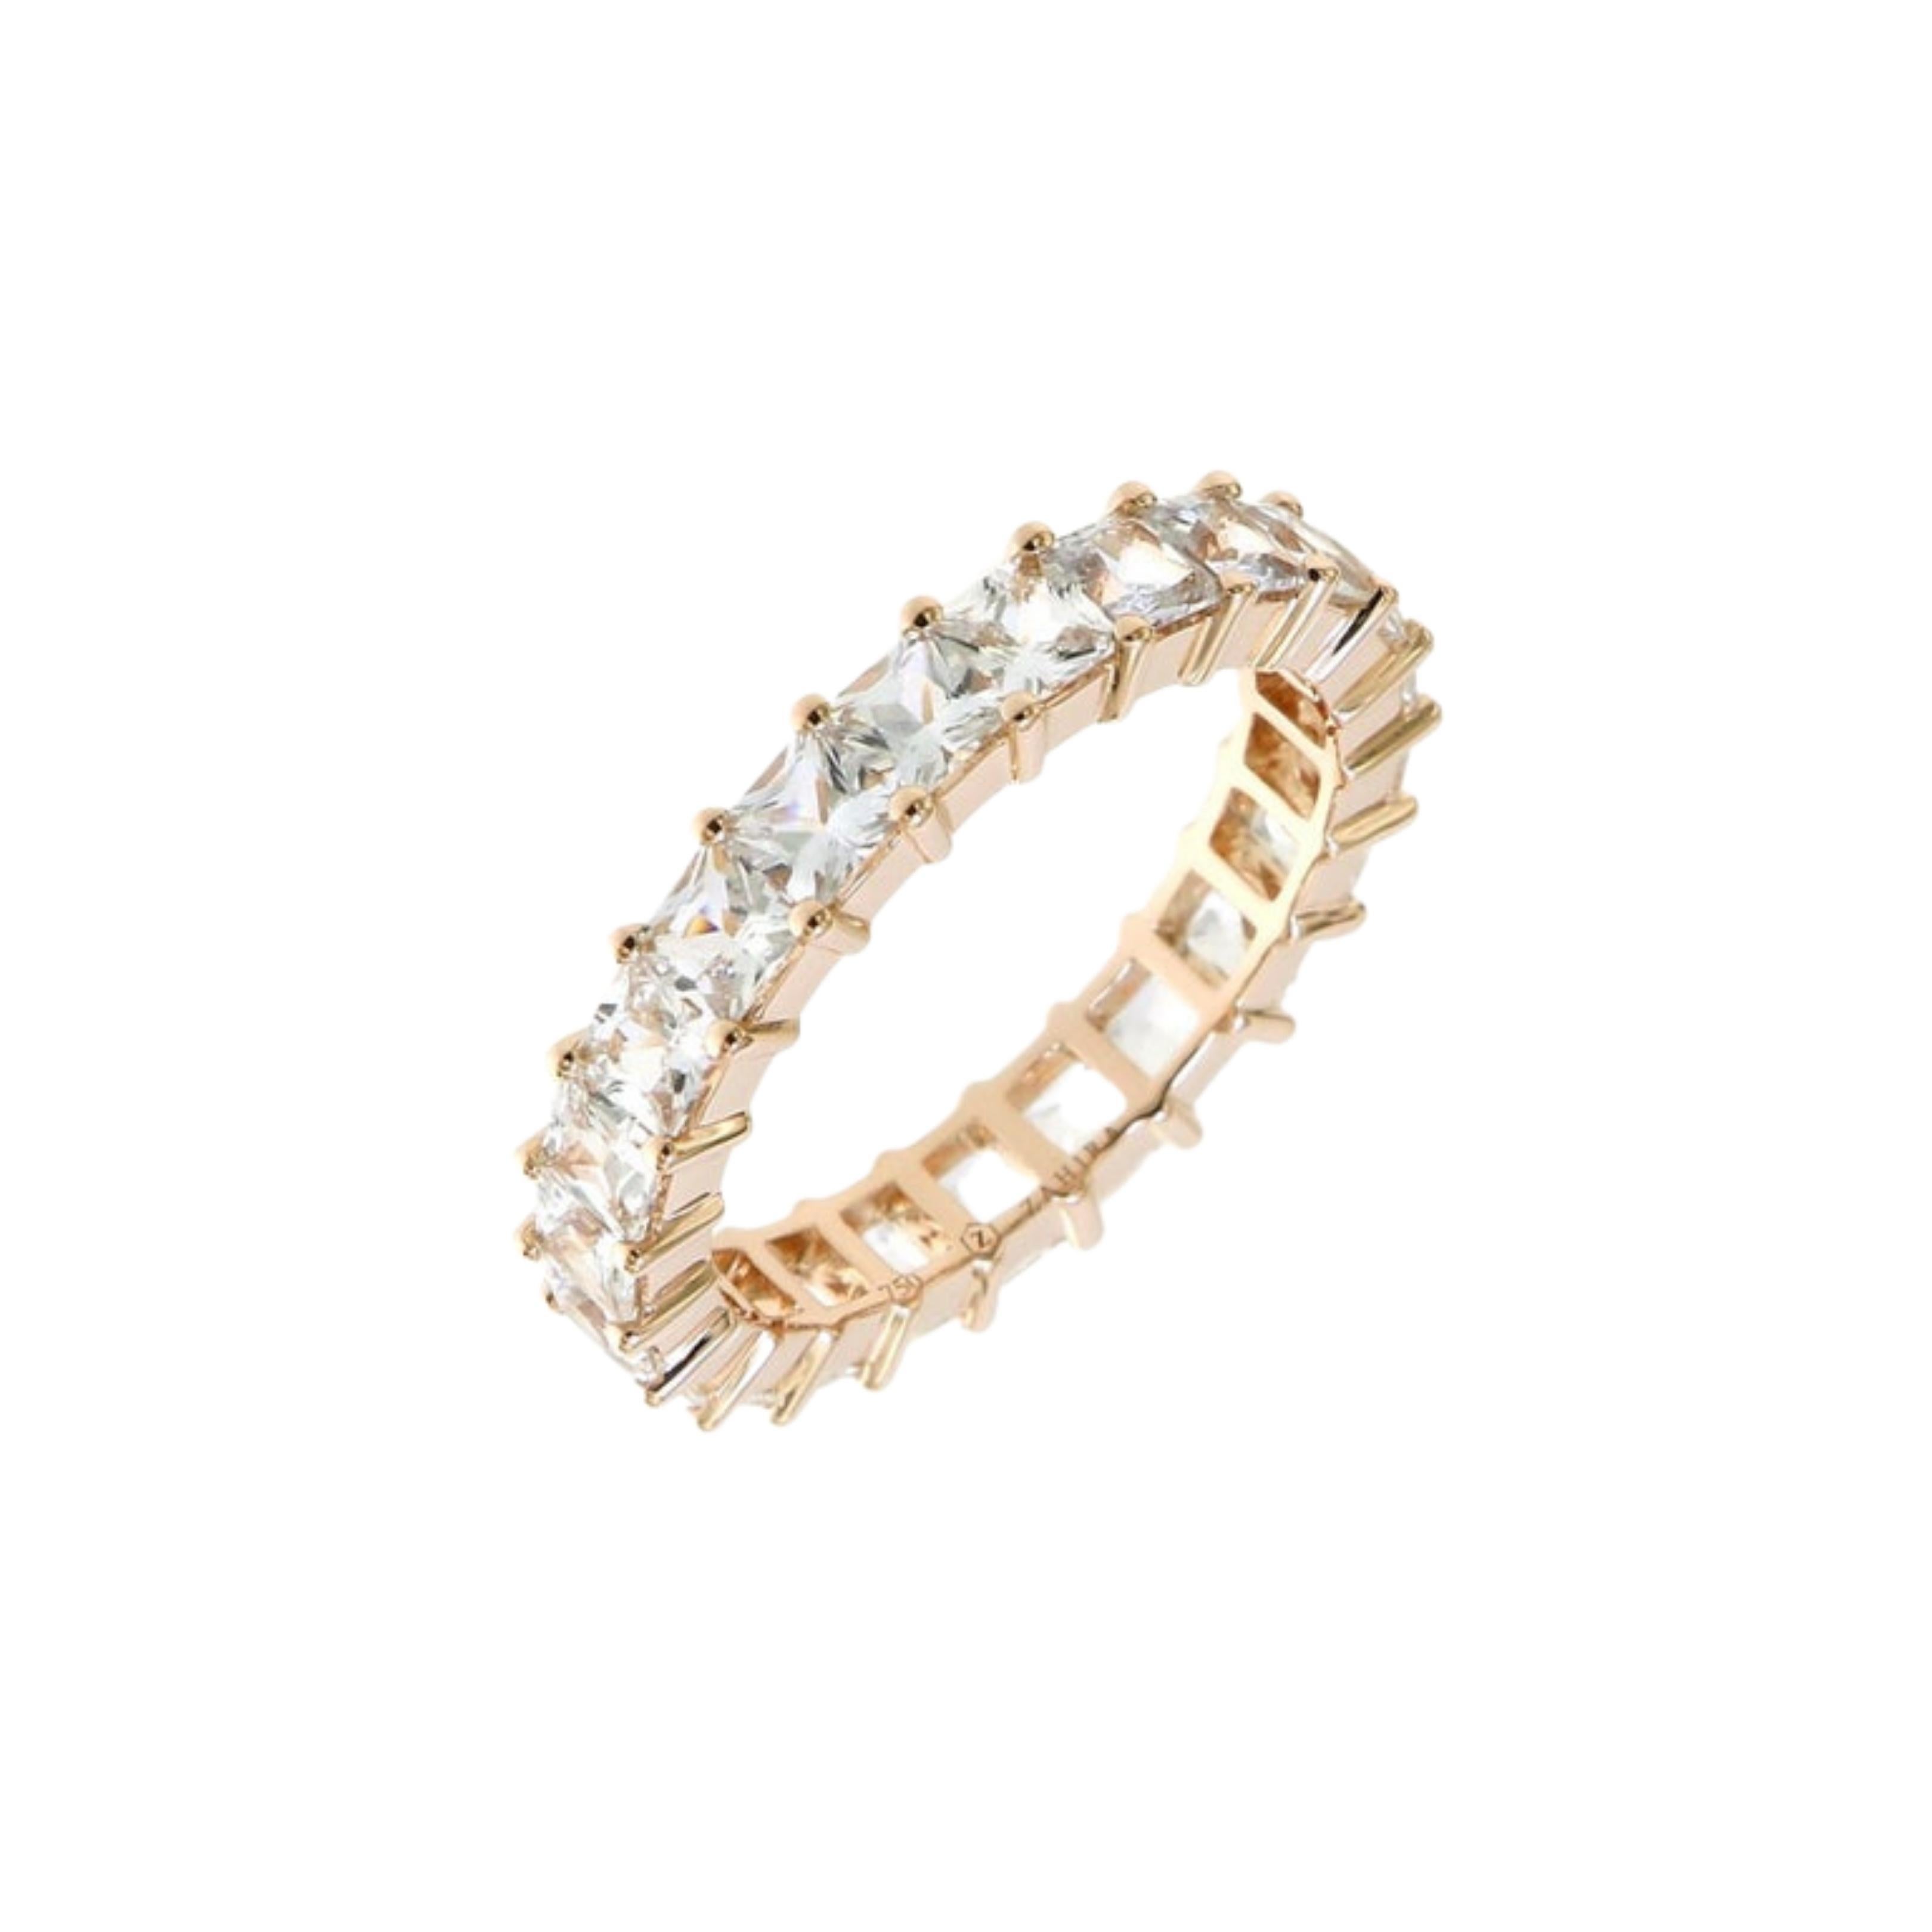 This ring is made from 3mm natural and perfectly cut sapphires which total 3.98 carats perfectly set into this high polished 18k pink gold eternity band. 

This ring is a size 56 EU or a size 7.5 US. It can also be custom ordered to size. Production